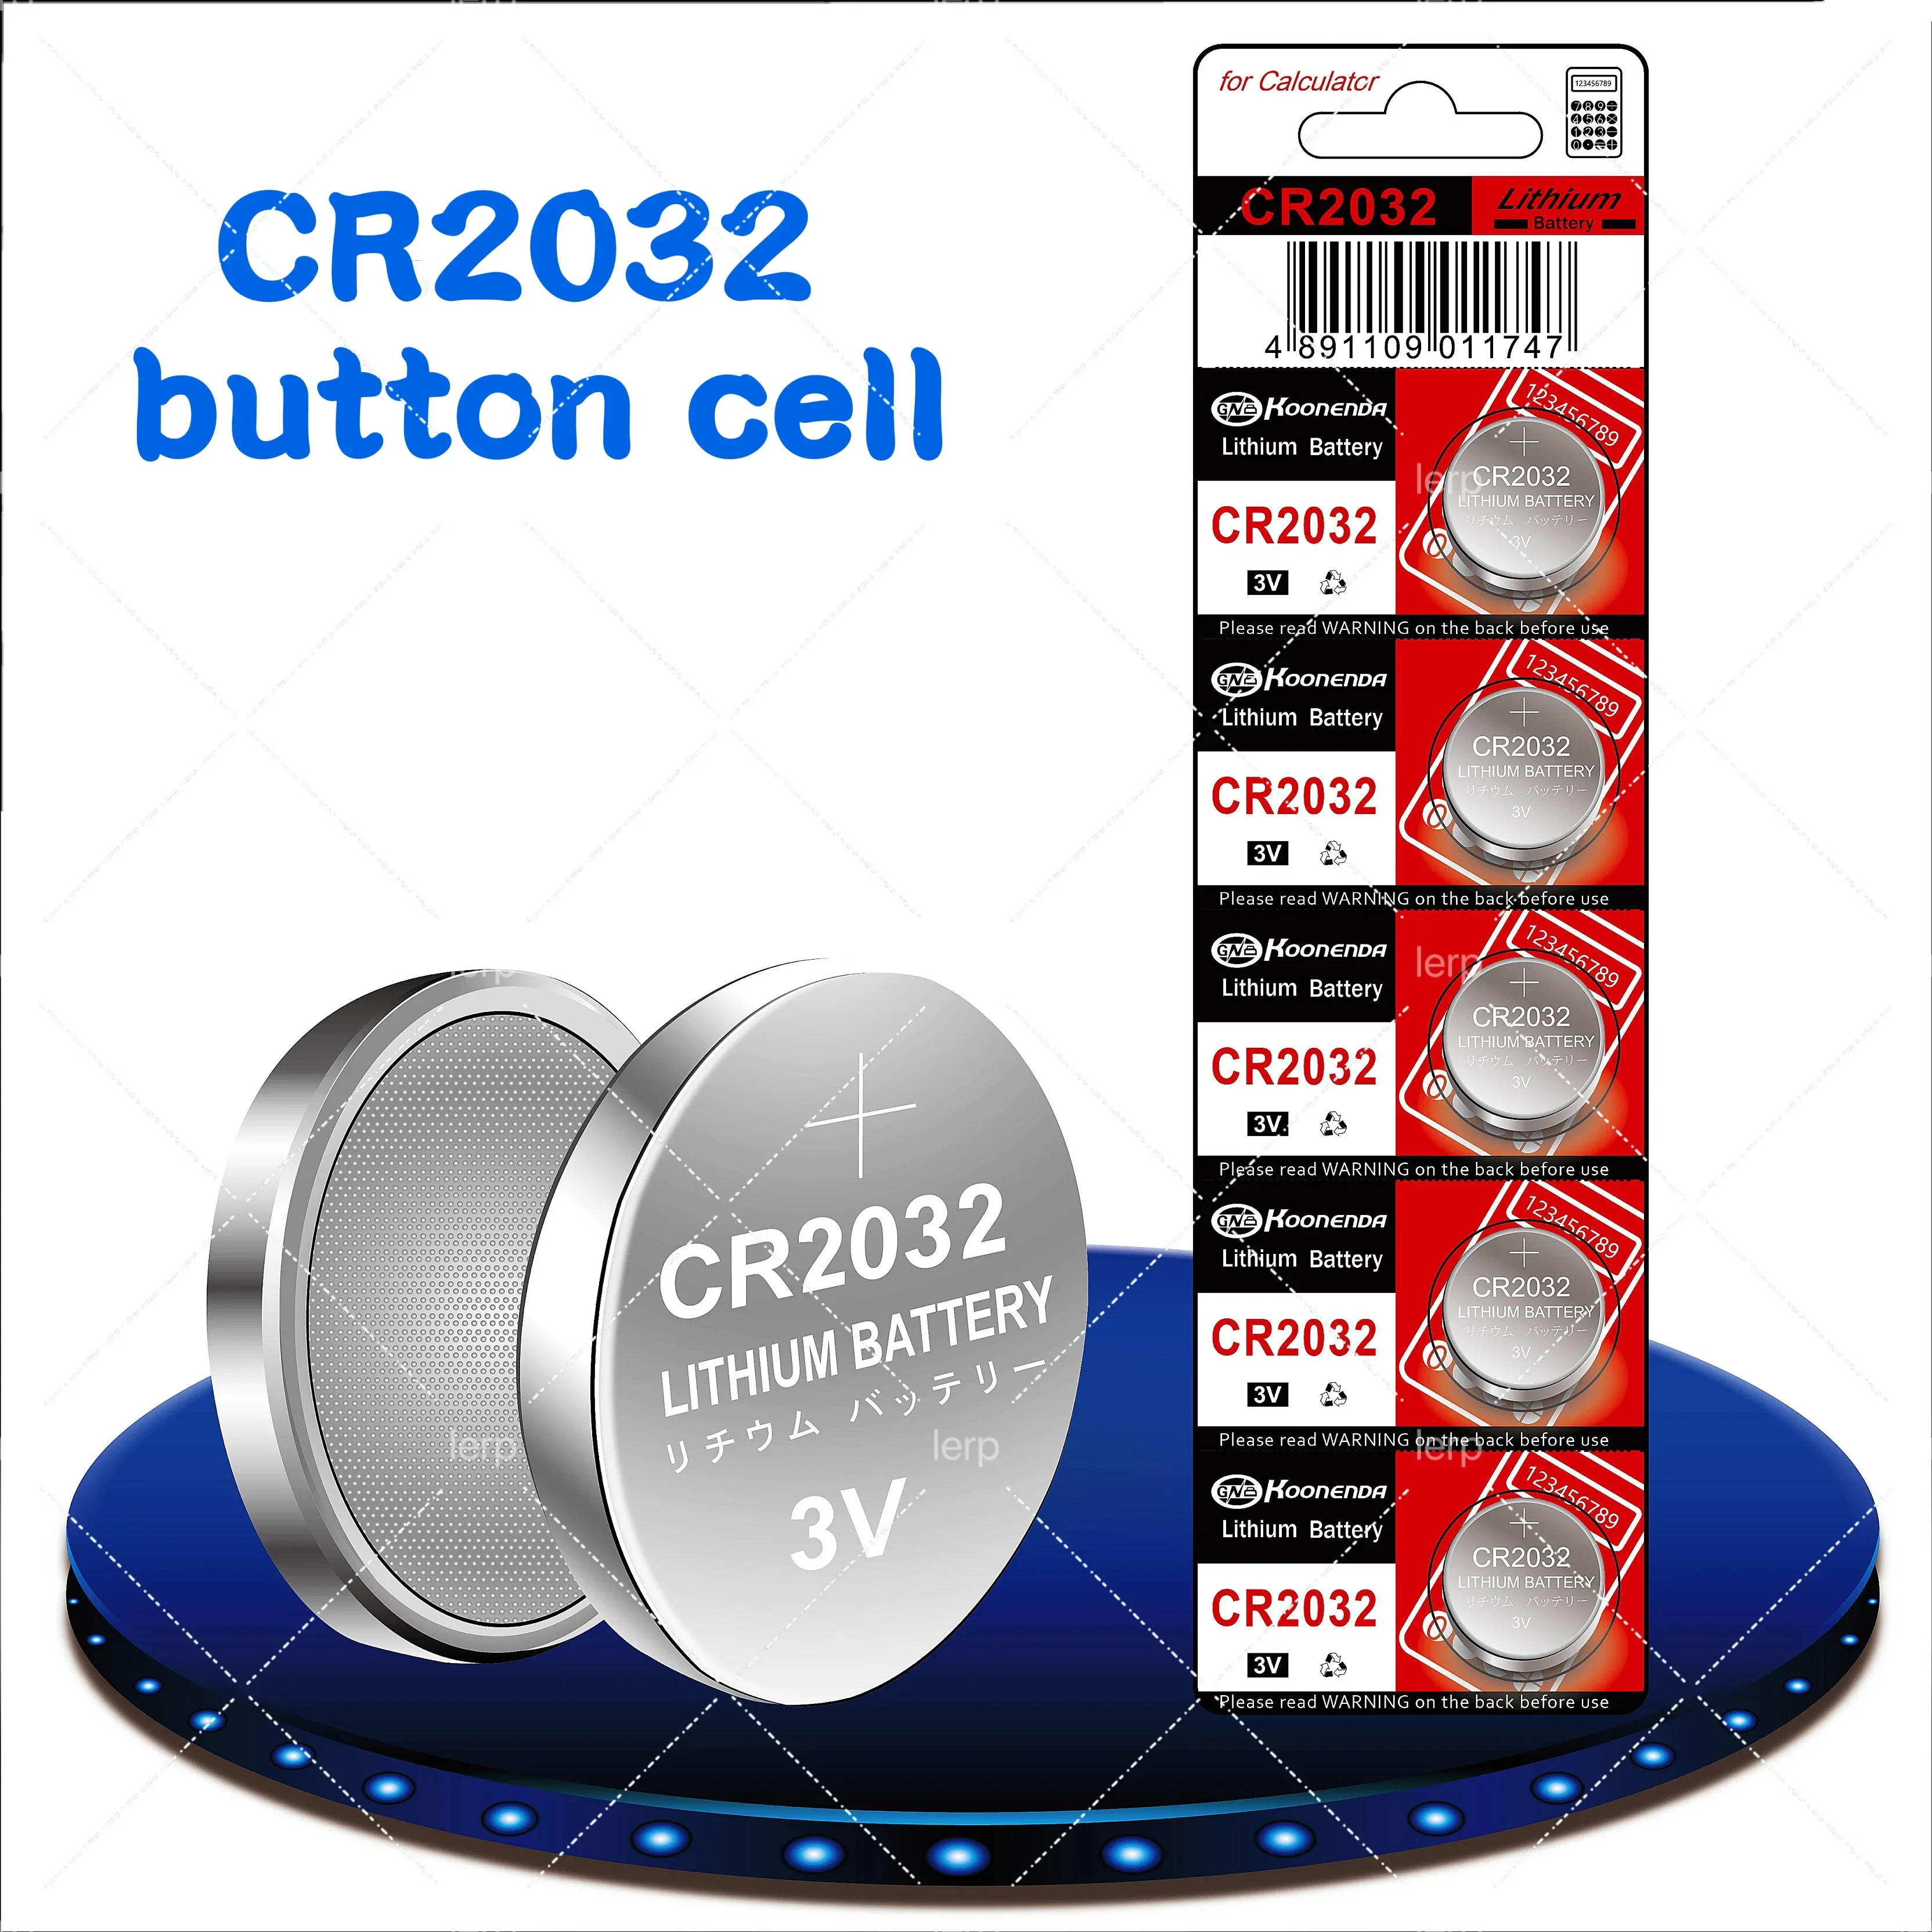 

CR2032 Coin Cell Battery Car Remote Control Anti-Theft Device Coin Cell Electronics